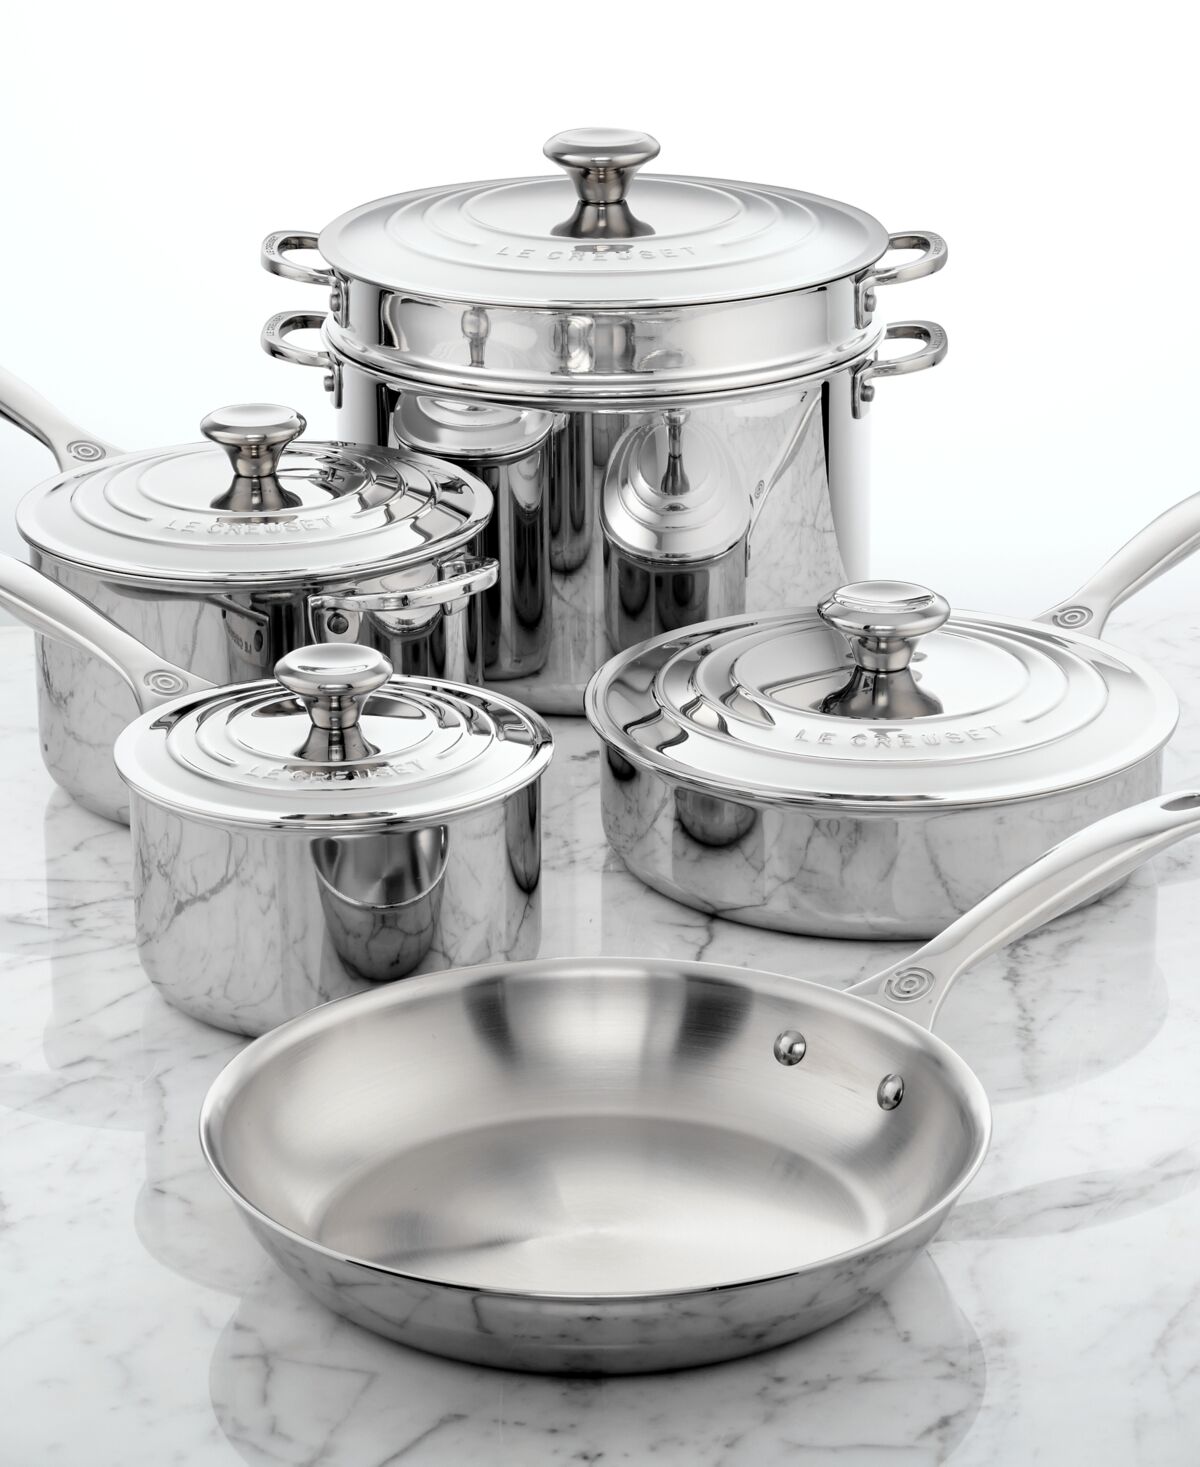 Le Creuset 10 Piece 3-Ply Stainless Steel Cookware Set - Stainless Steel